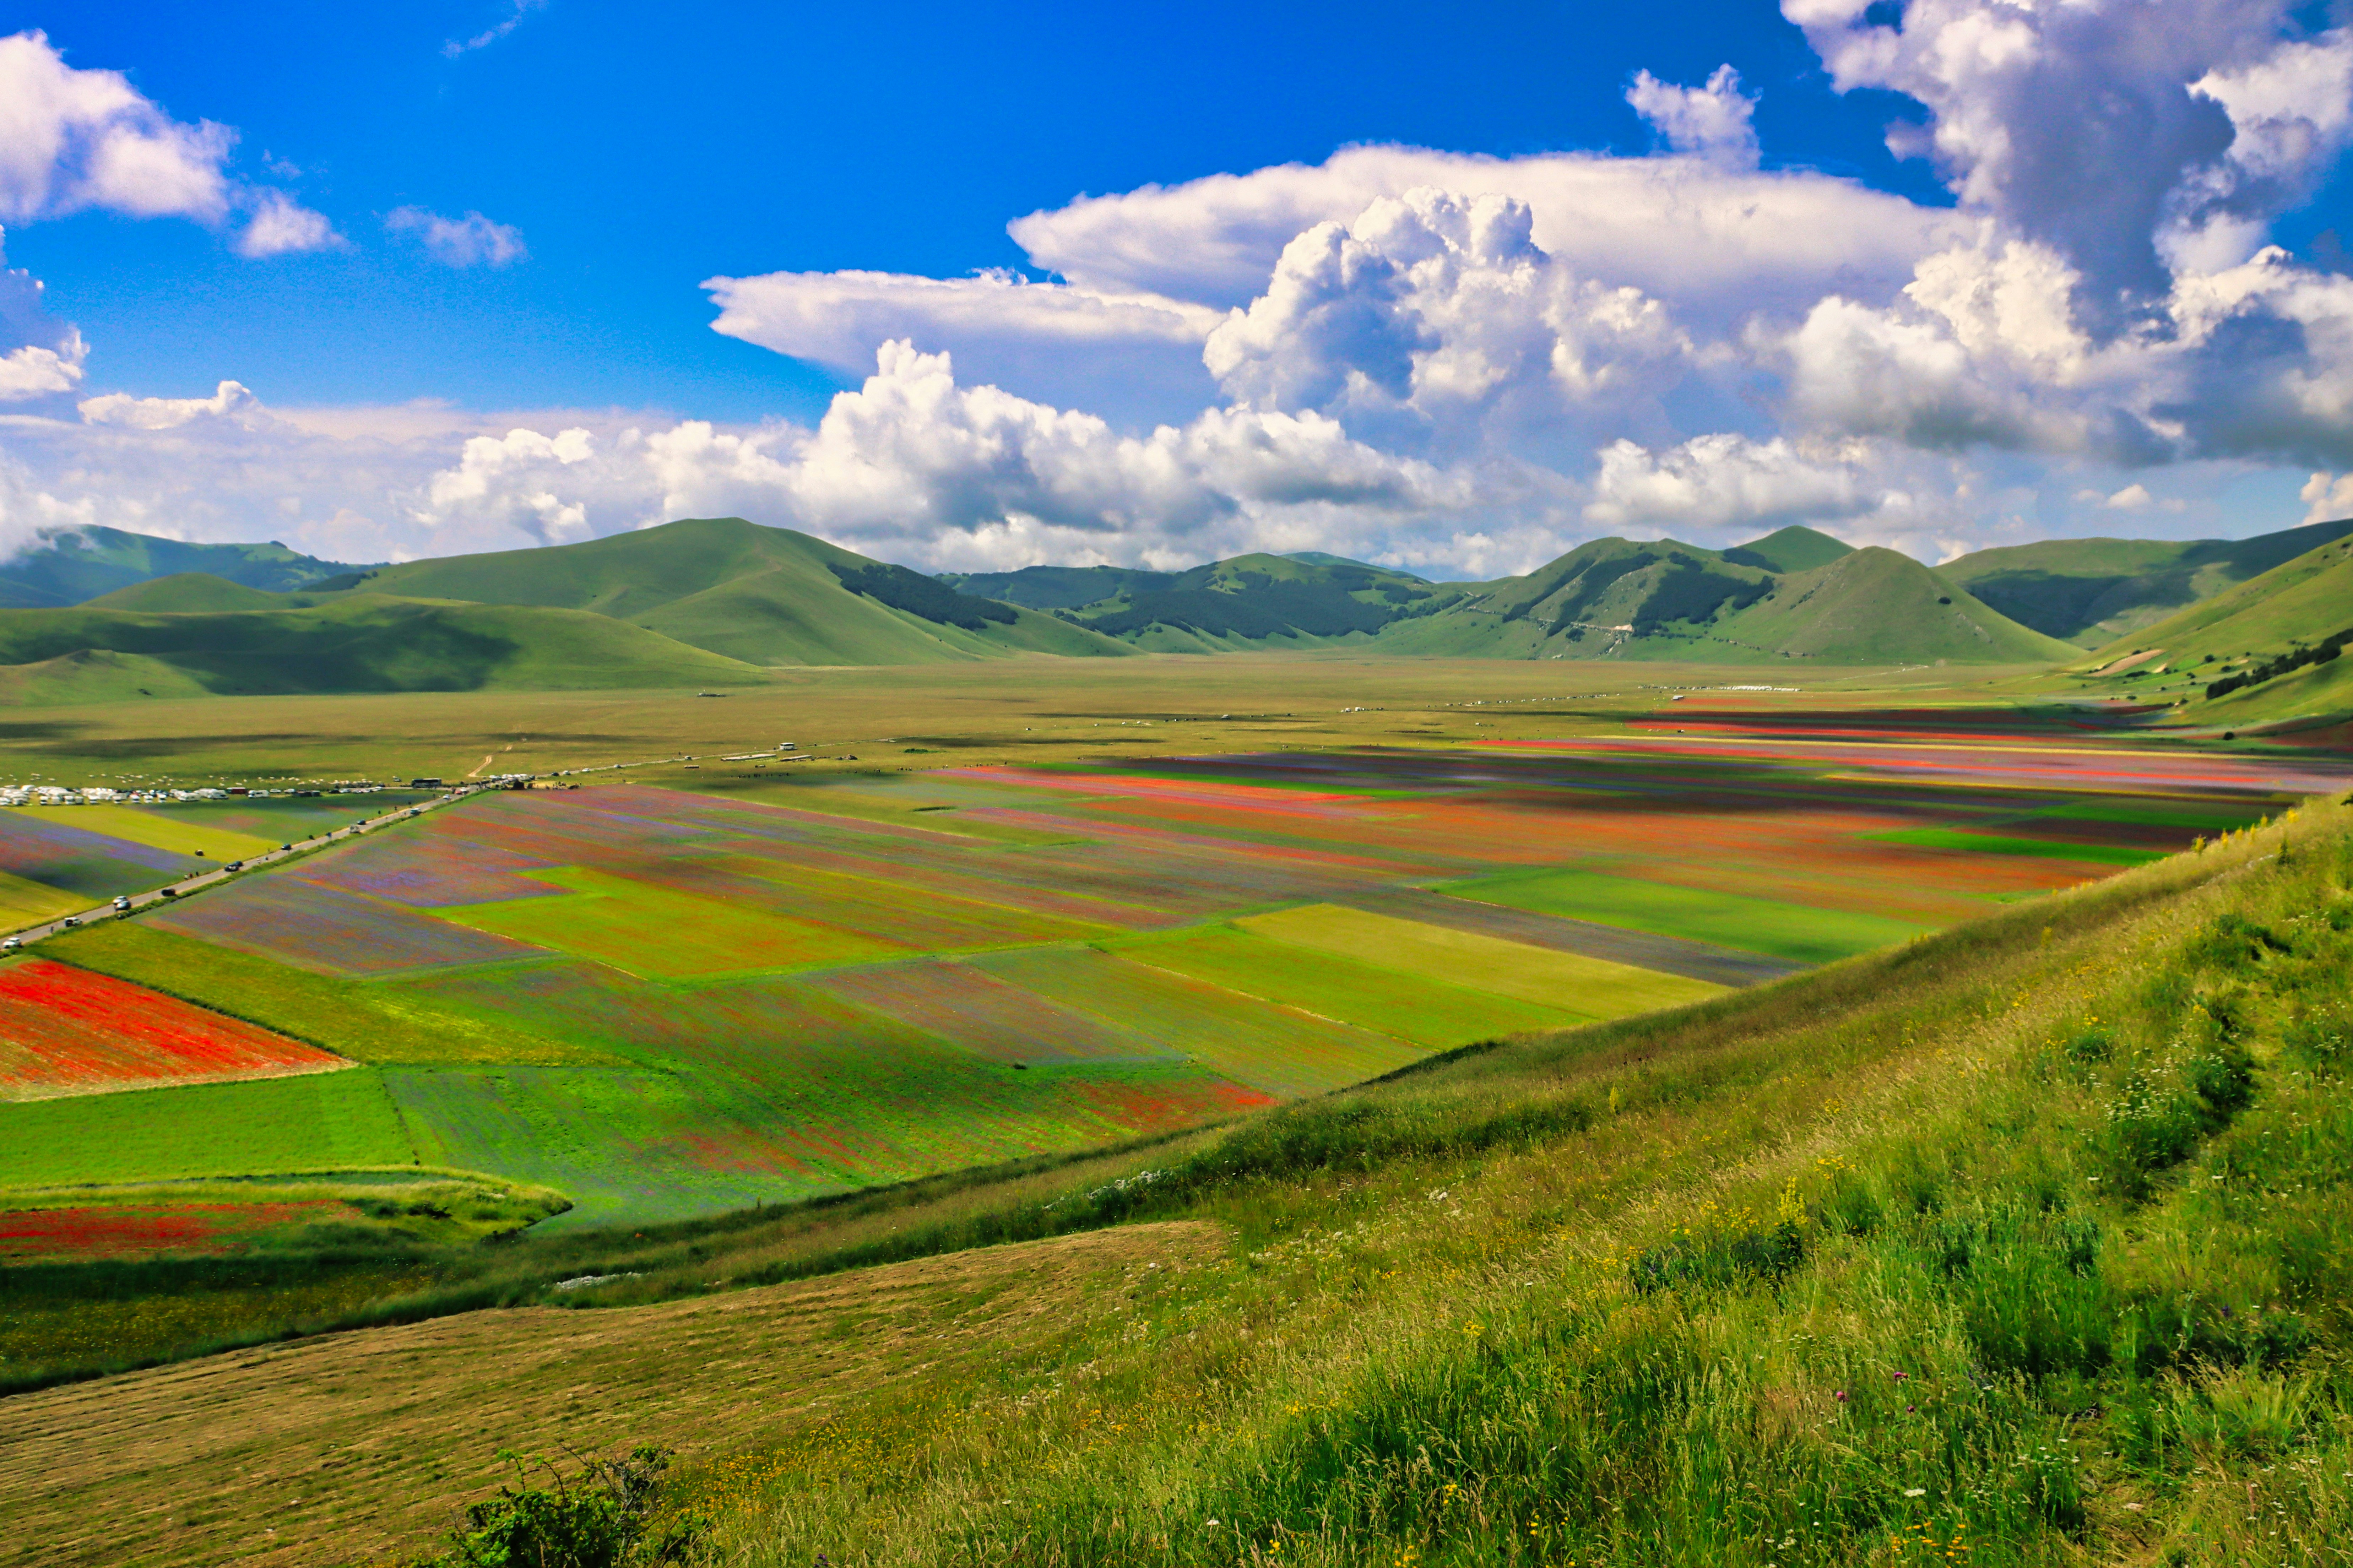 The photo portrays the wonderful and magical spectacle of nature that wakes up during the flowering period in the countryside of Catelluccio di Norcia, in Umbria.